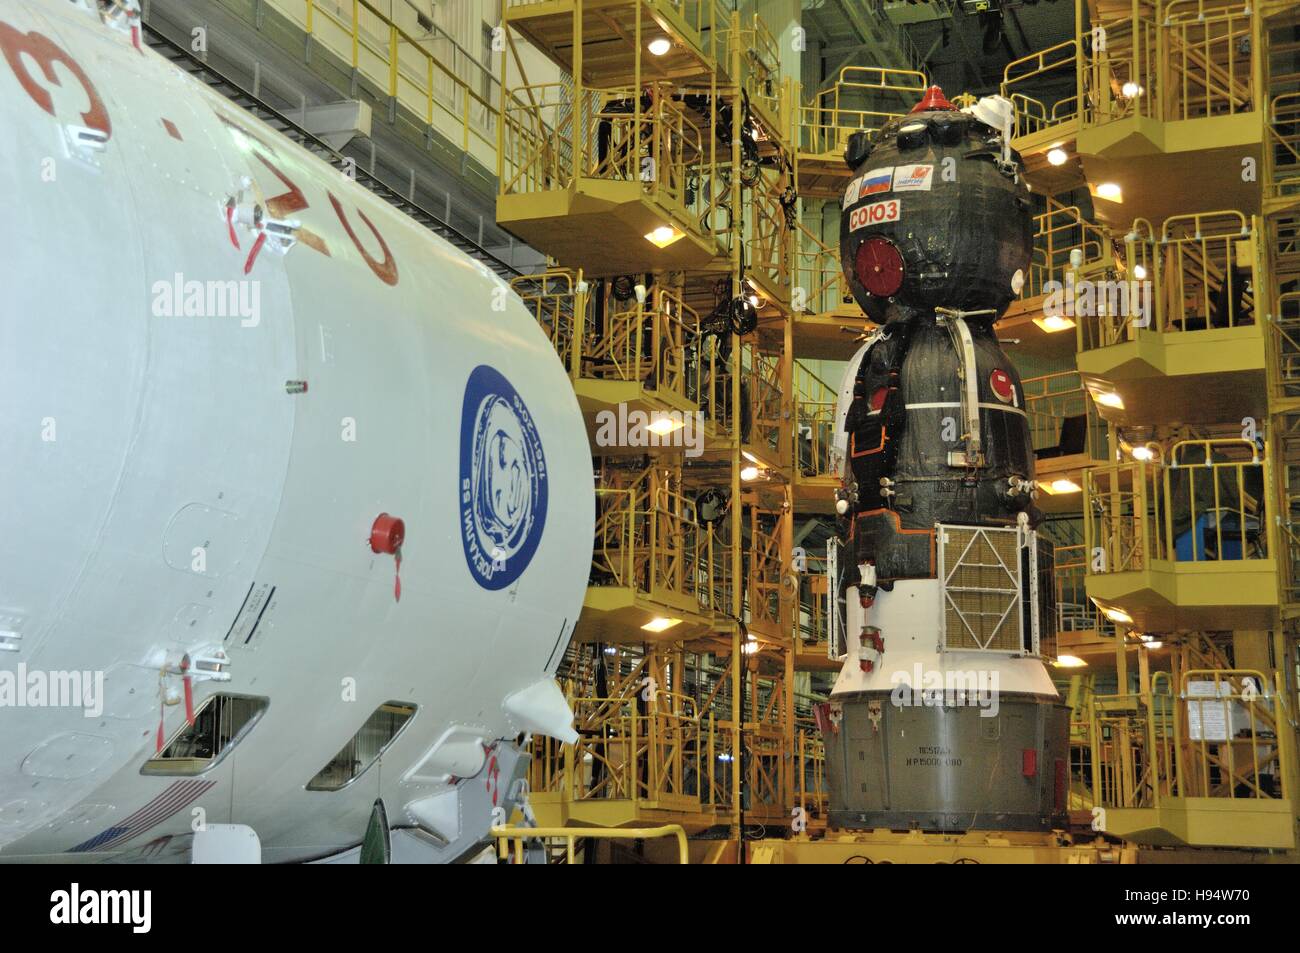 The Russian Soyuz MS-03 spacecraft is prepared for encapsulation for the NASA International Space Station Expedition 50-51 mission at the Baikonur Cosmodrome Integration Facility November 9, 2016 in Baikonur, Kazakhstan. Stock Photo